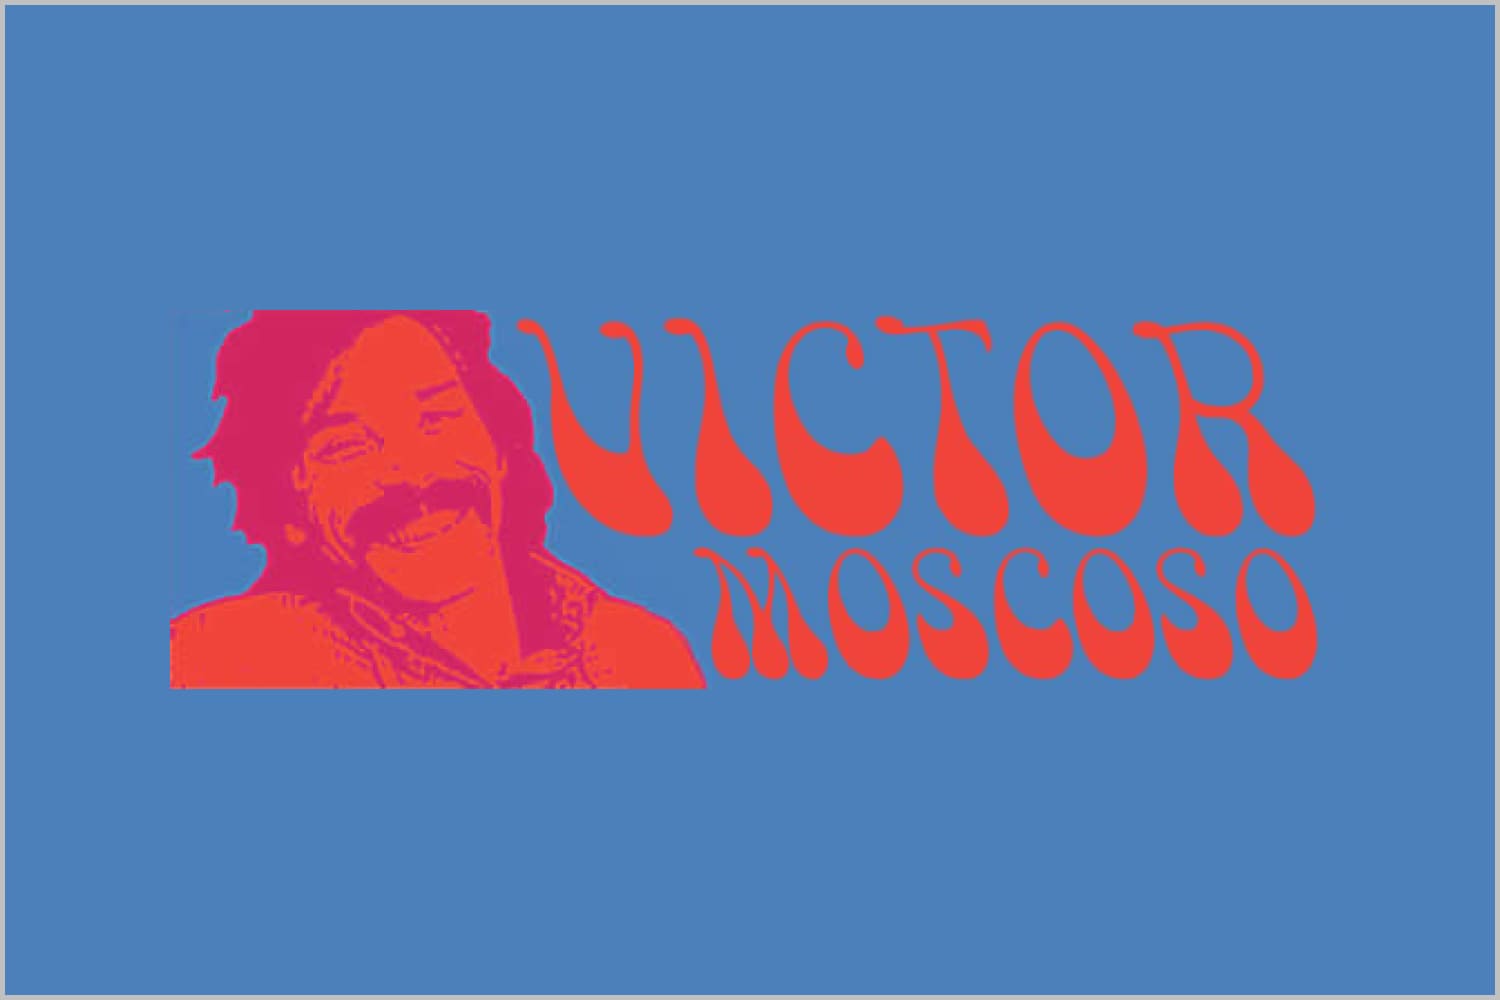 Image of smiling man and words Victor Moscoso in red on blue background.